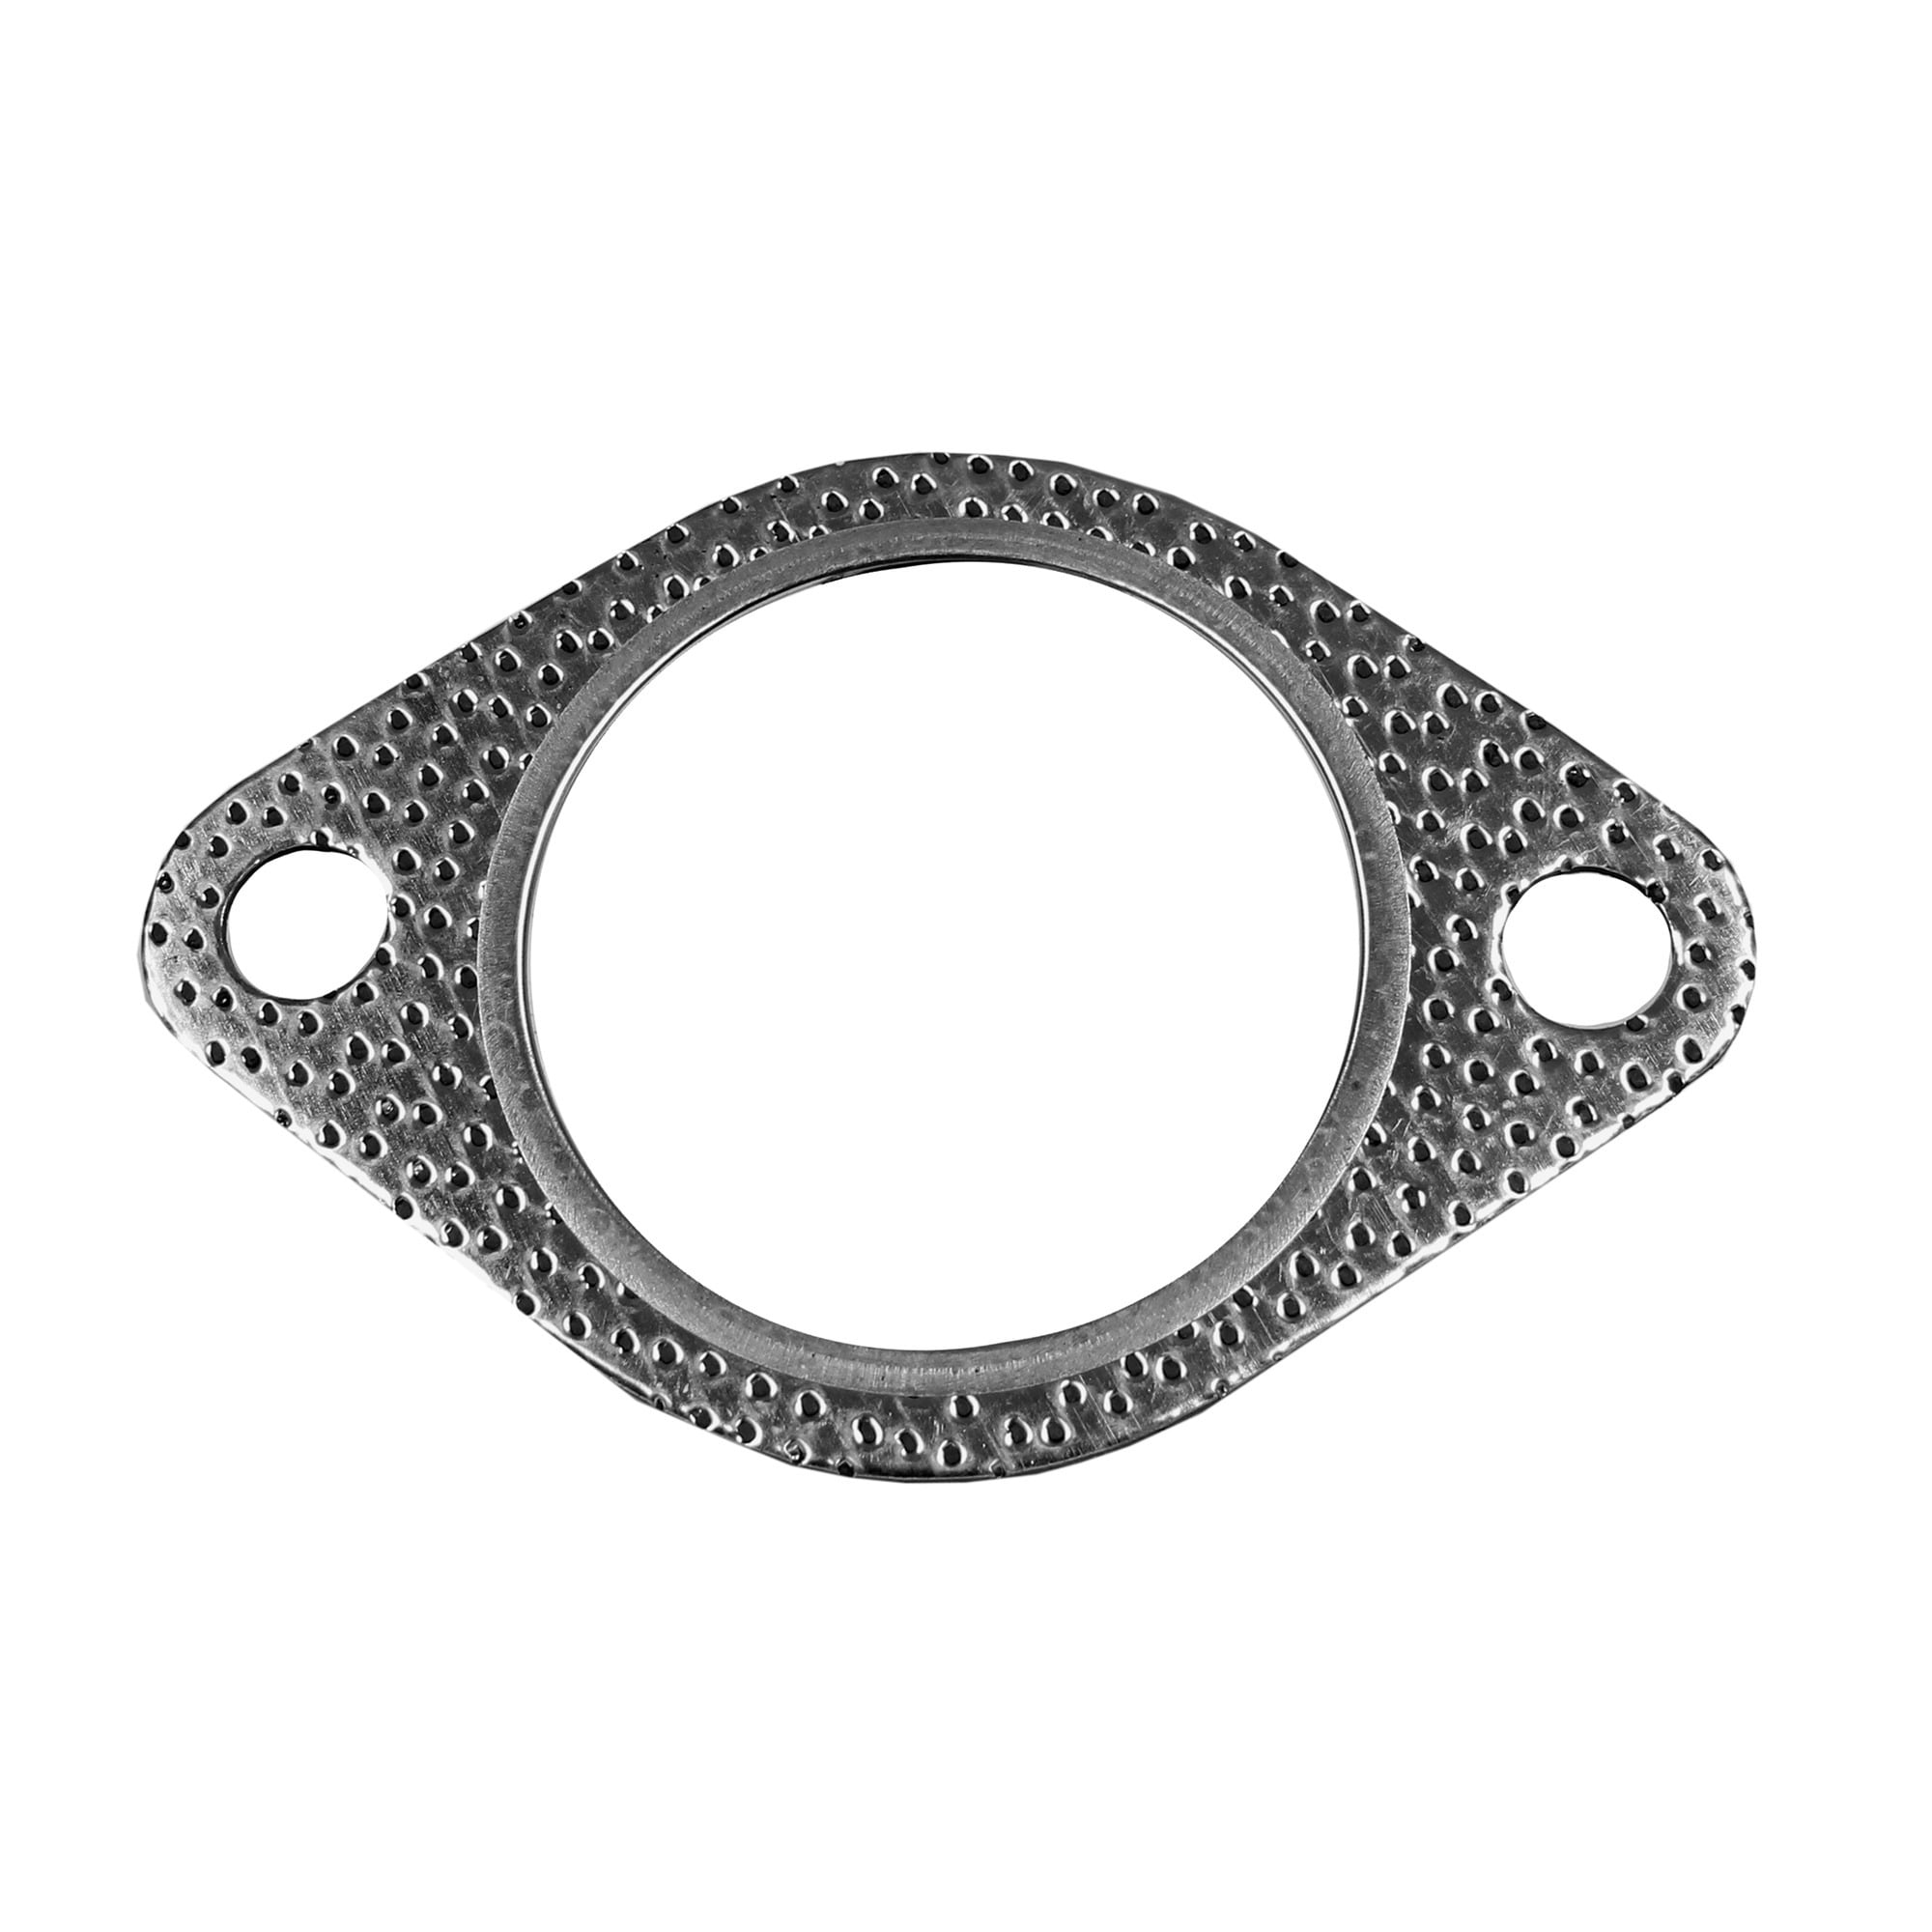 Cadillac. GMC Exhaust Pipe Flange Gasket Walker 31575 fits certain Chevy 